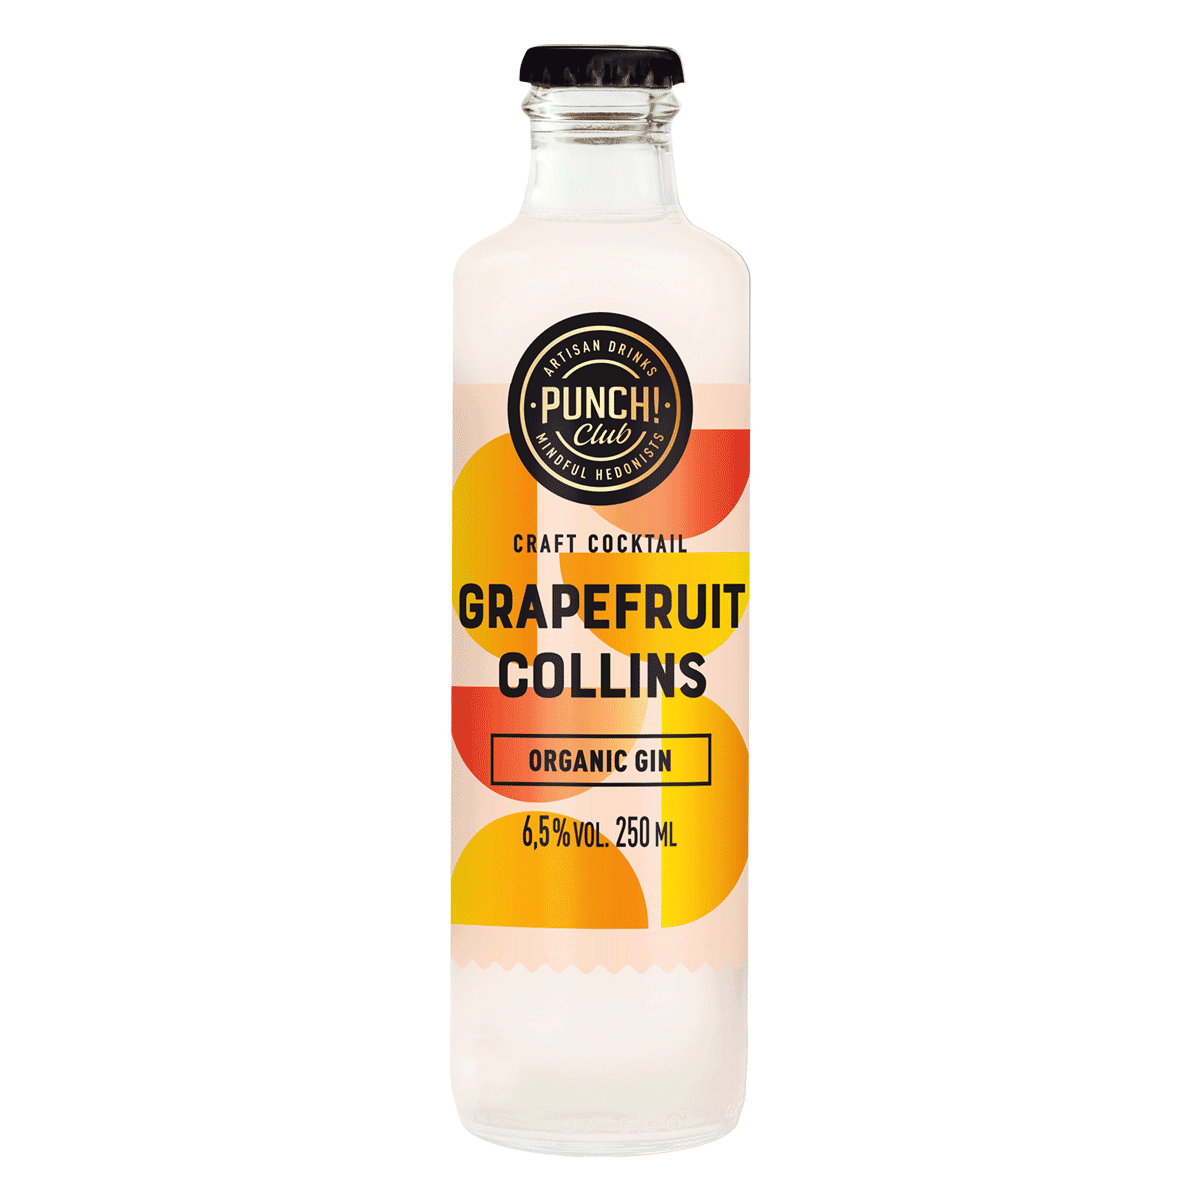 Premixed Grapefruit cocktail by Punch Club